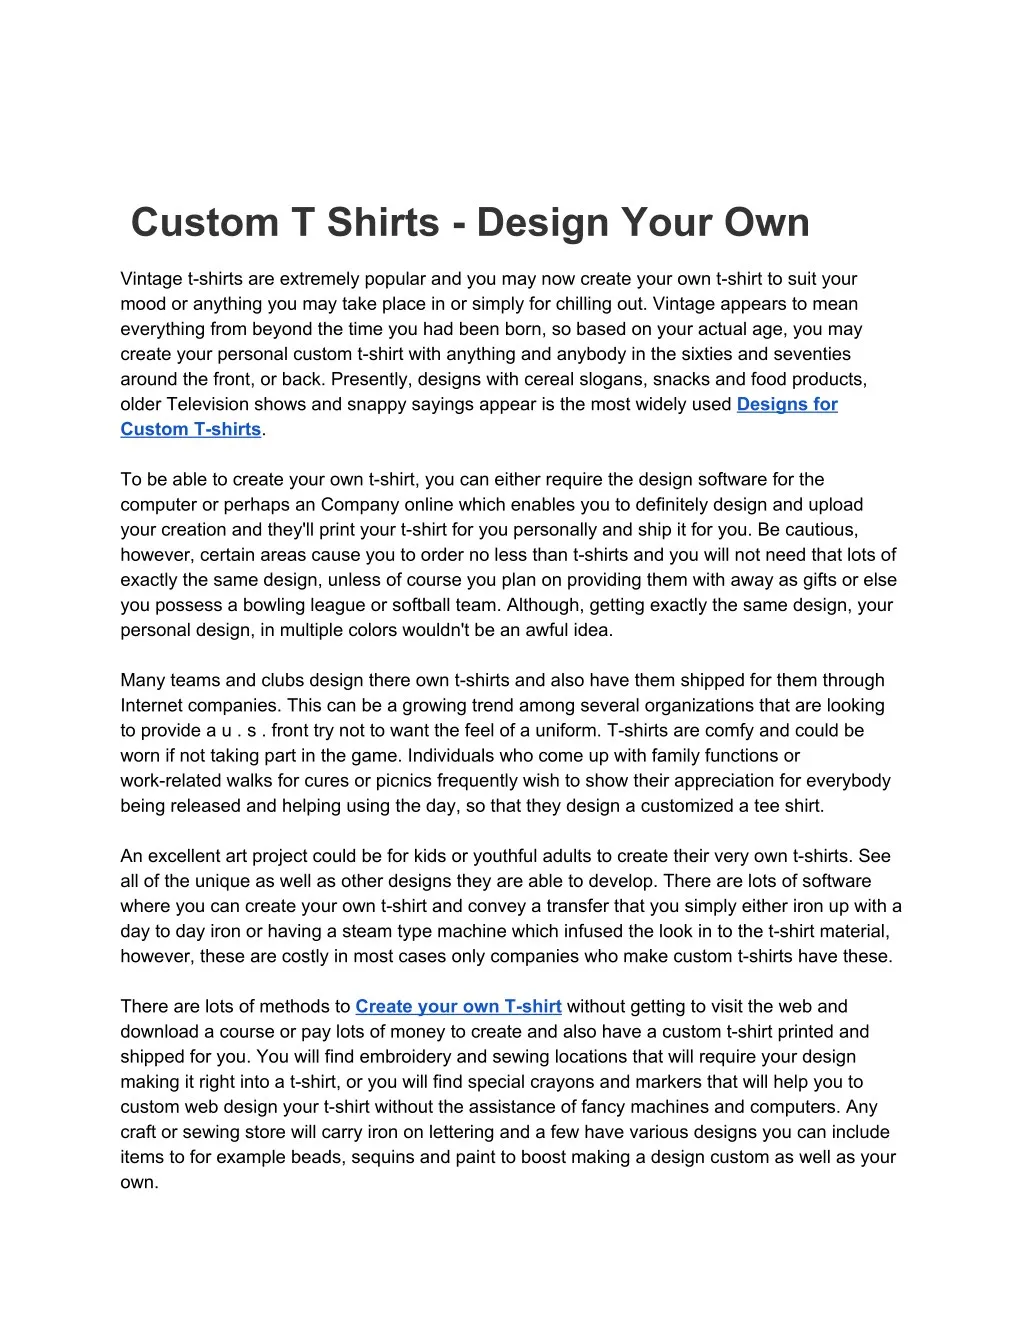 custom t shirts design your own